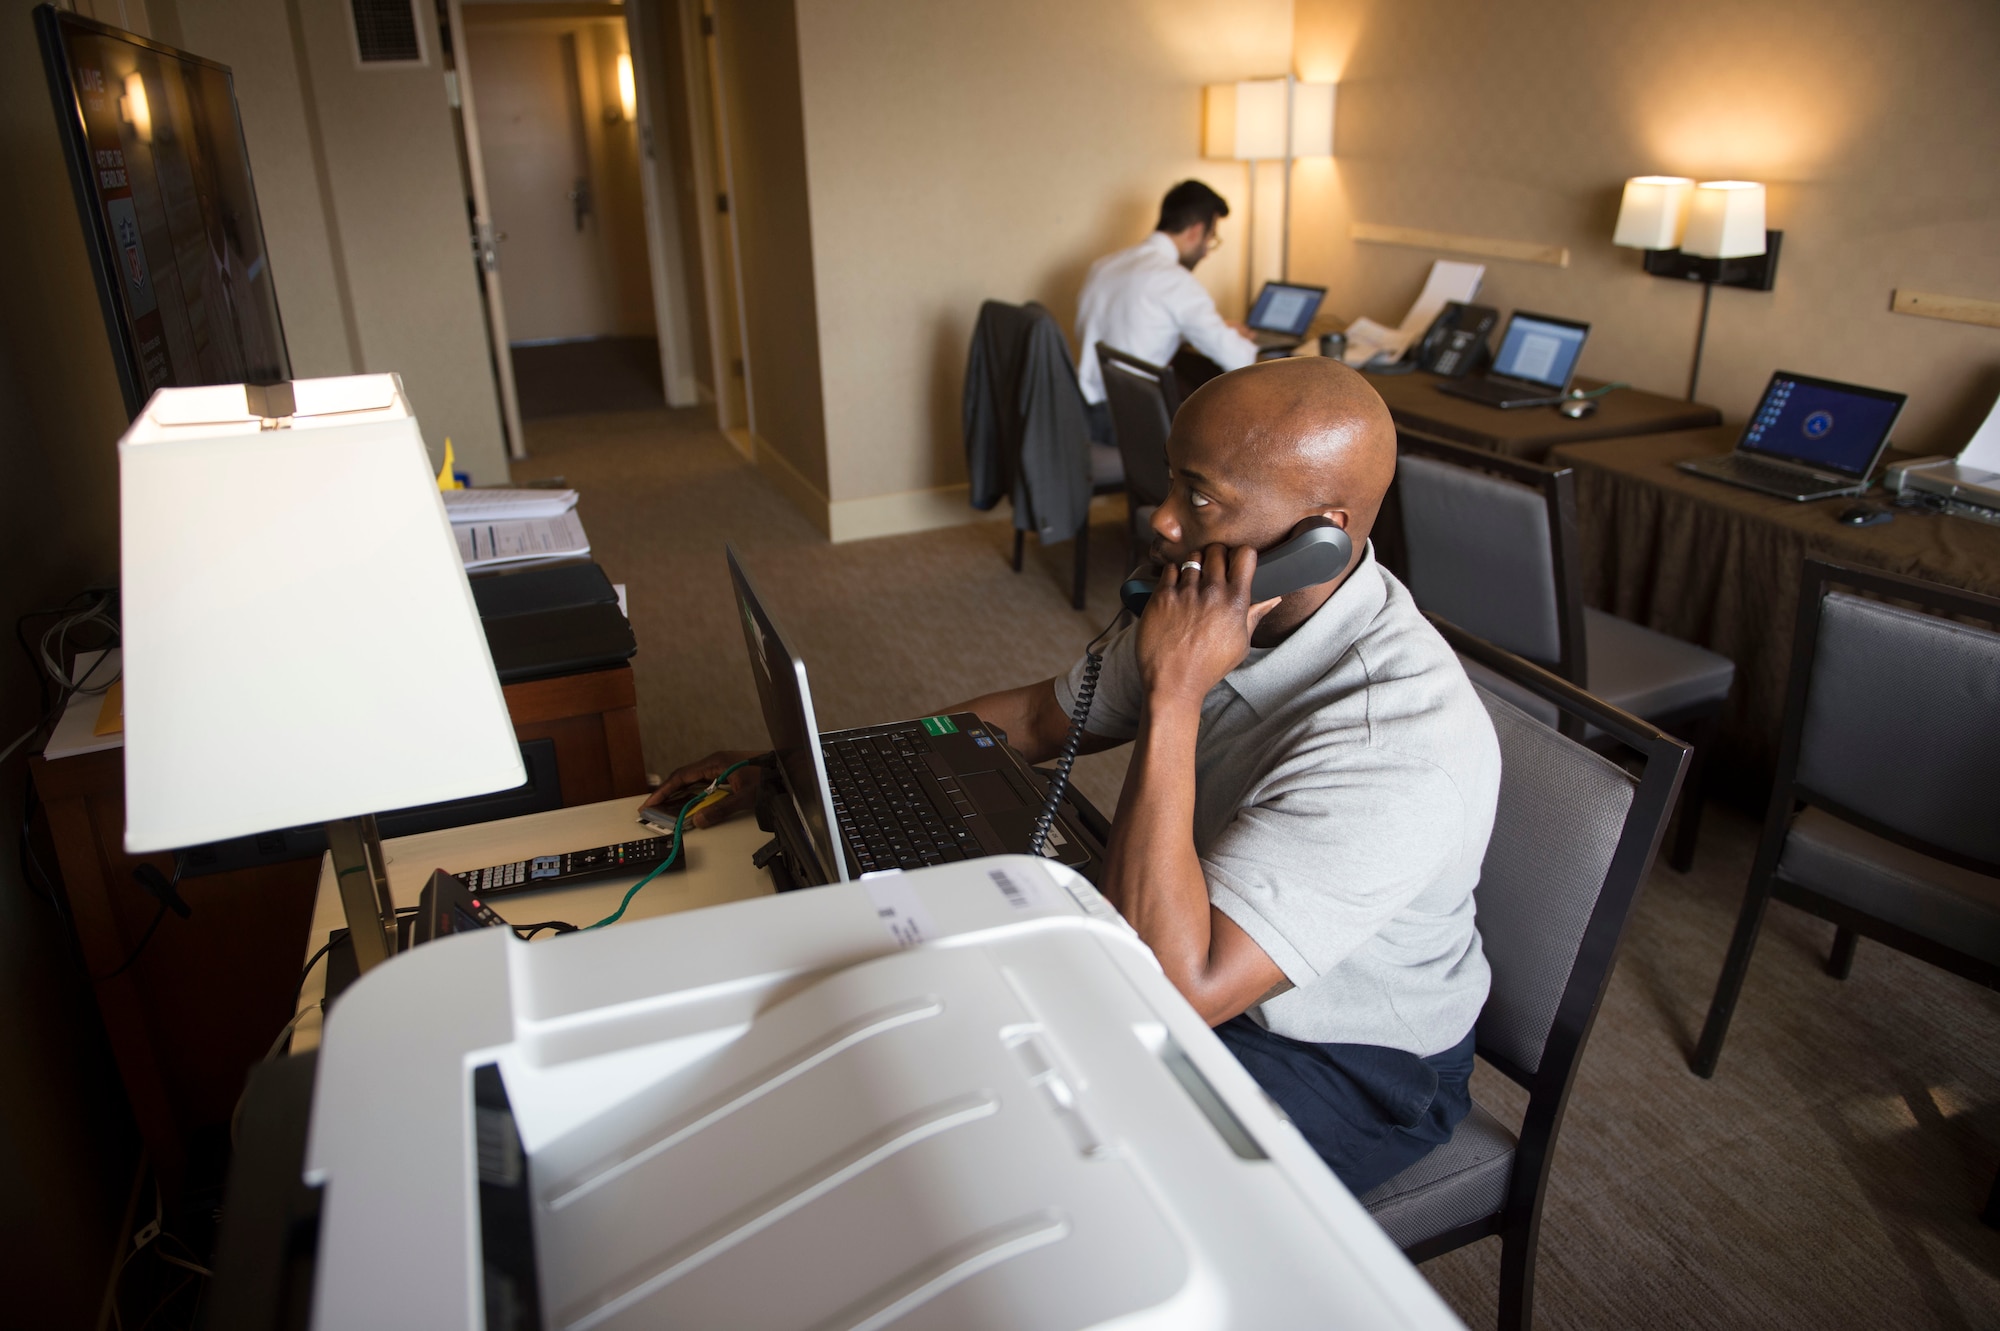 Tech. Sgt. Demond Bush makes a phone call in a communications room set up in the hotel where Defense Secretary Ash Carter and his staff stayed during a recent trip to the West Coast. The Air Force tech support staff provides 24/7 access to secure networks, Internet, printers and phones. (U.S. Air Force photo)